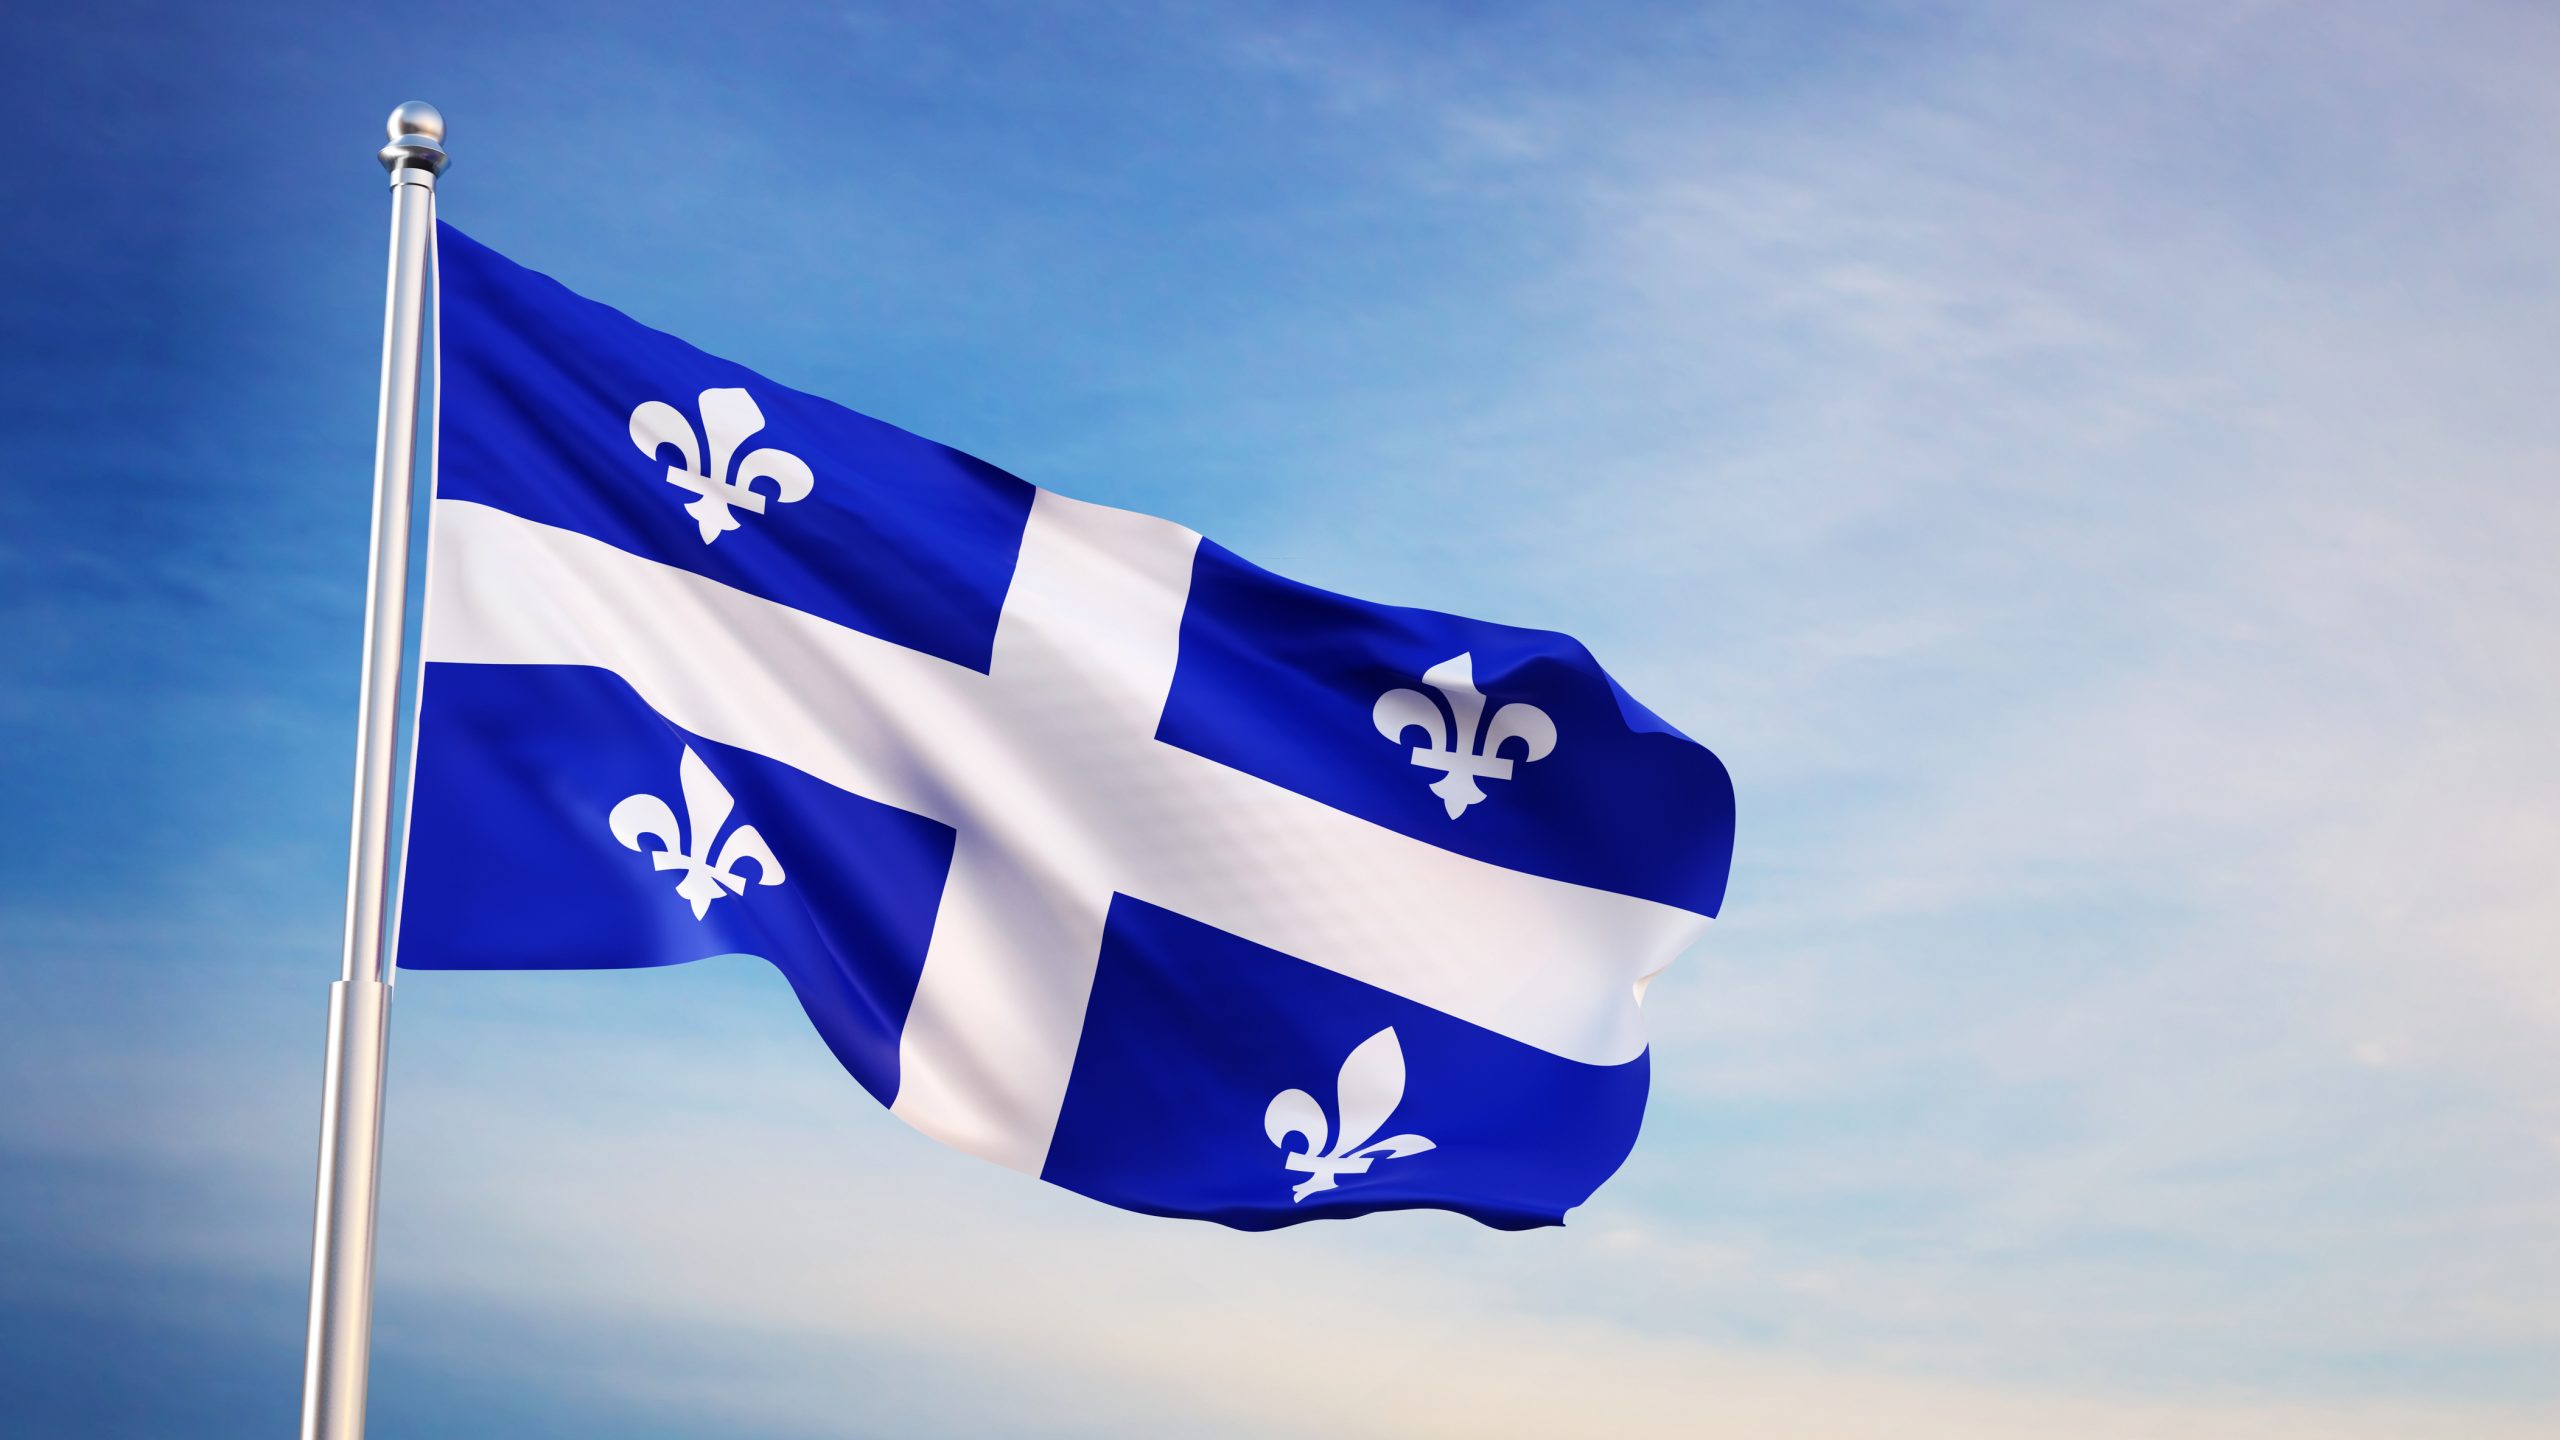 QUEBEC ADOPTS BILL RESTRICTING LEASE TRANSFERS, OFTEN USED TO LIMIT RENT INCREASES